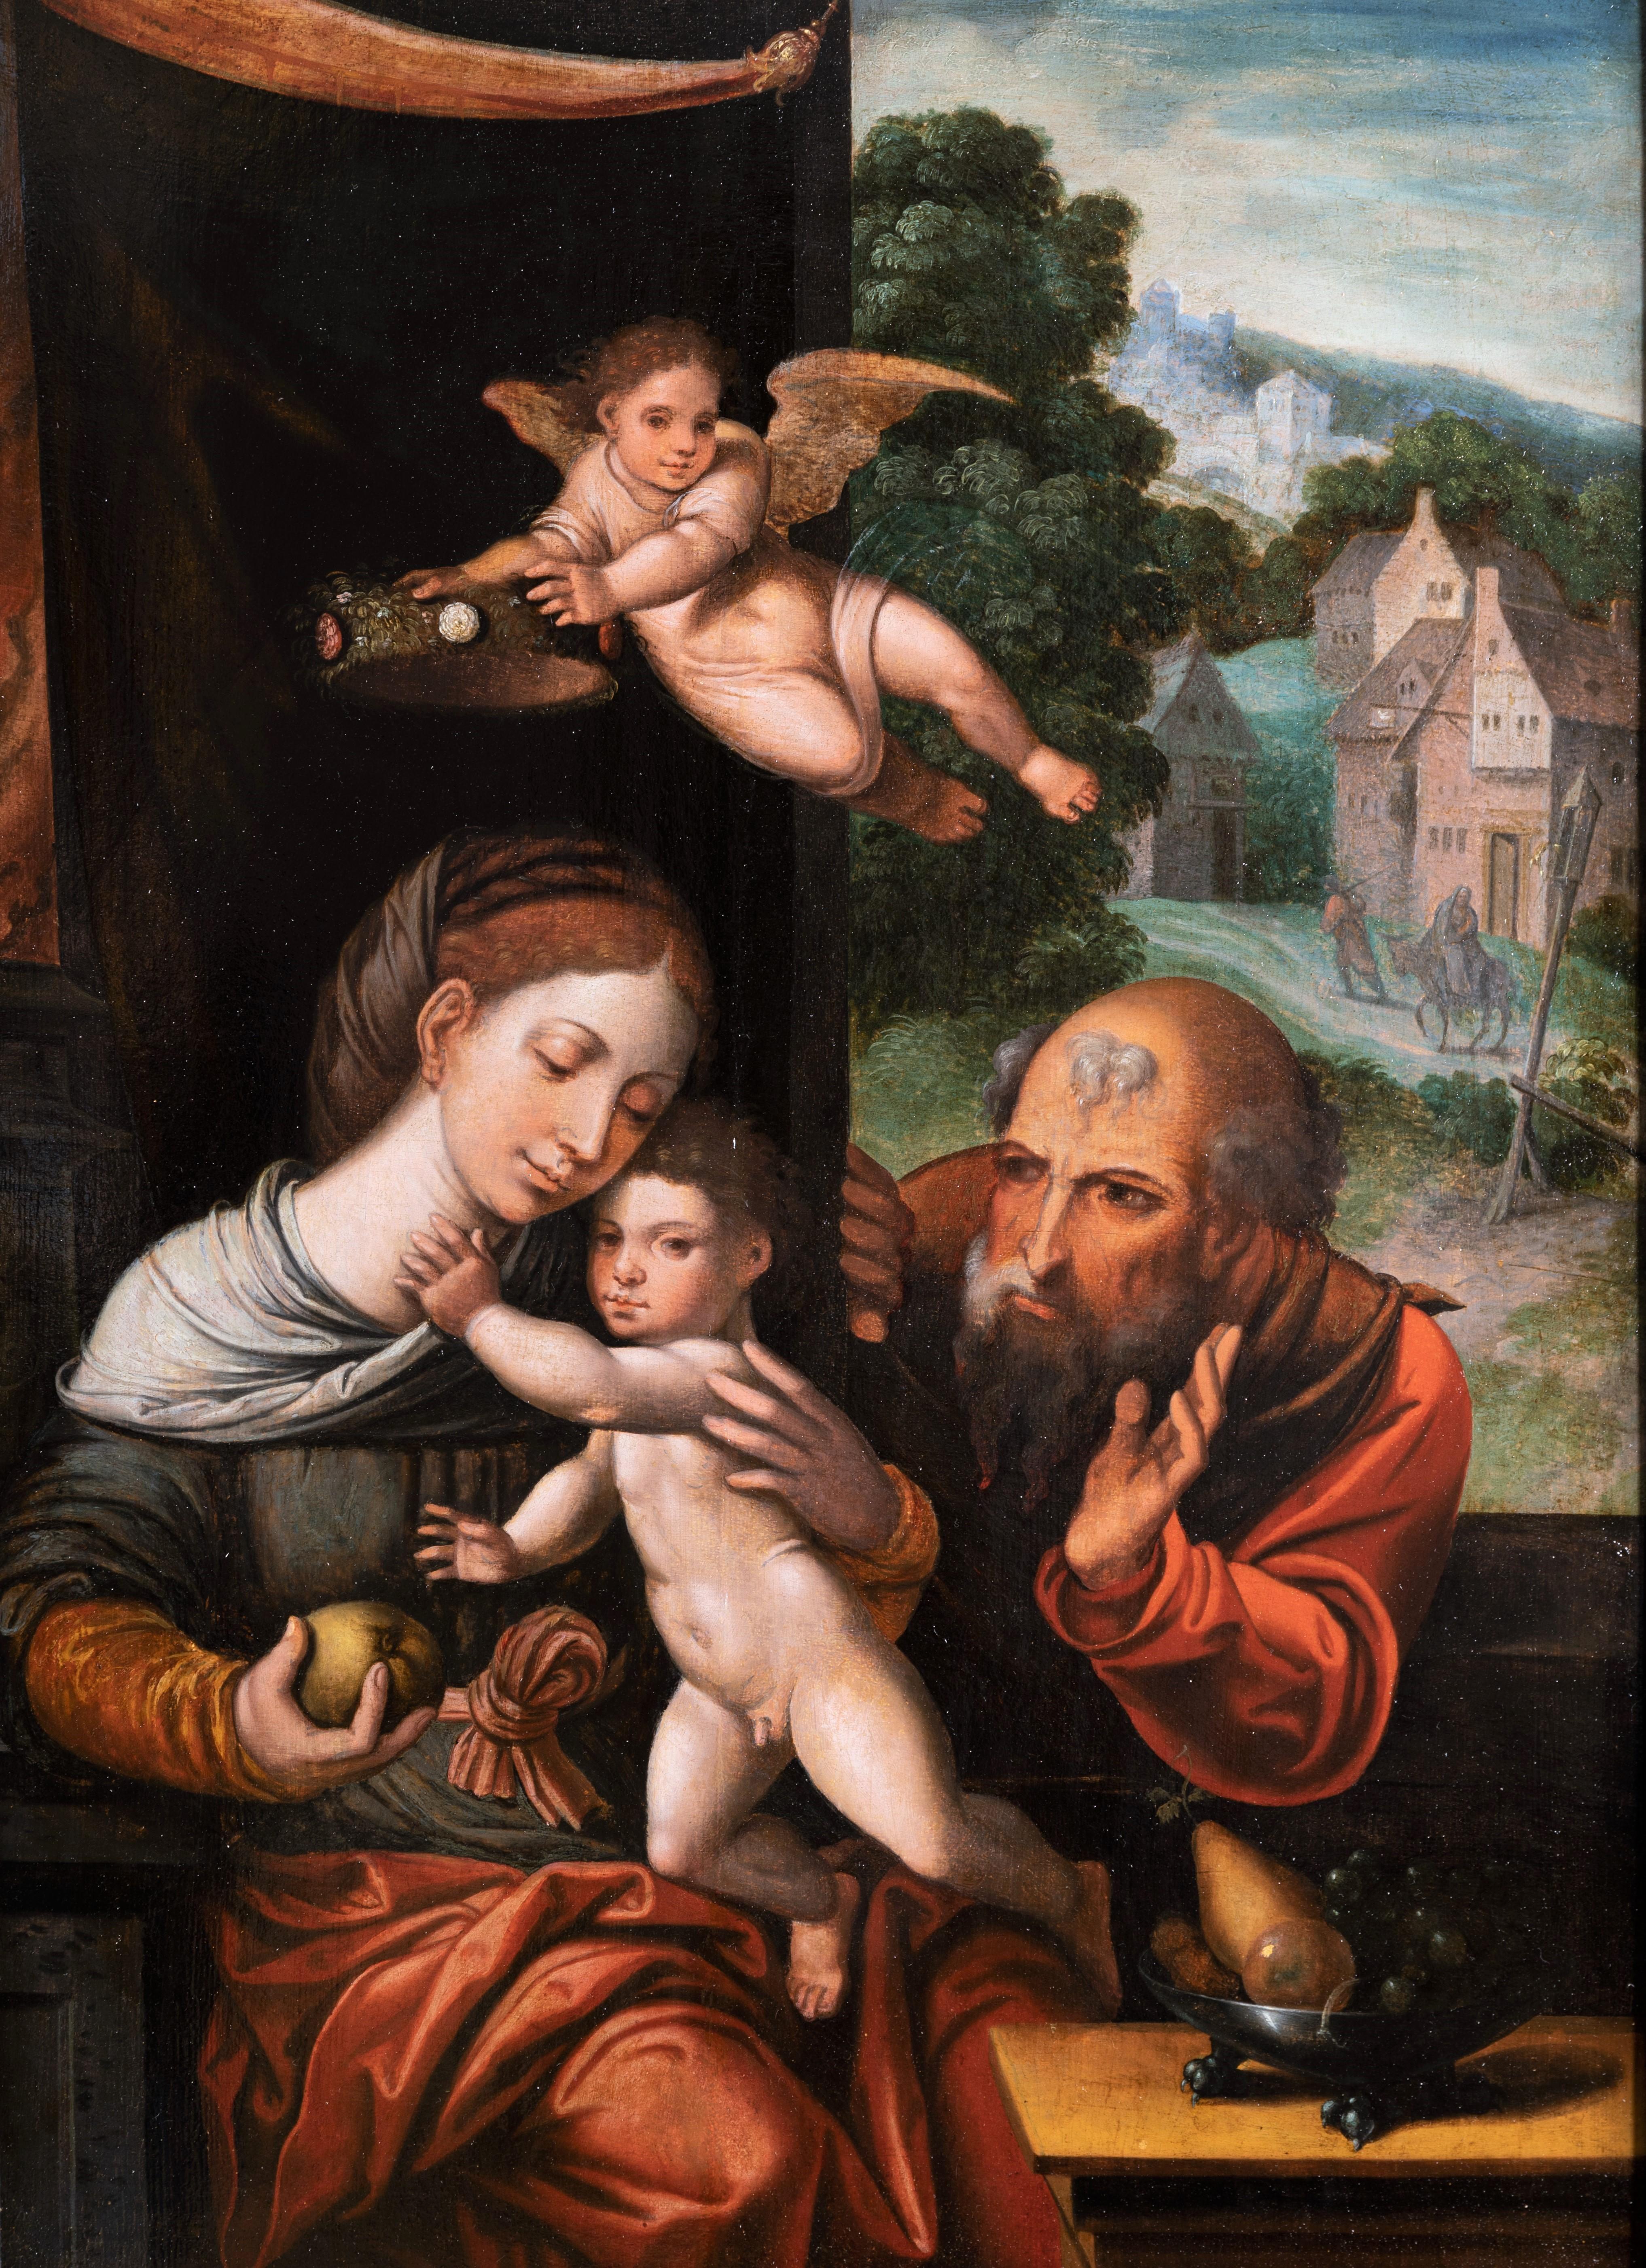 Holy family with an angel, workshop Pieter Coecke Van Aelst (Alost, 1502 - Bruxelles, 1550)
Faithful to the traditions of the late Gothic and early Renaissance, our painting depicts a favorite subject of Flemish painters, the Madonna and Child with